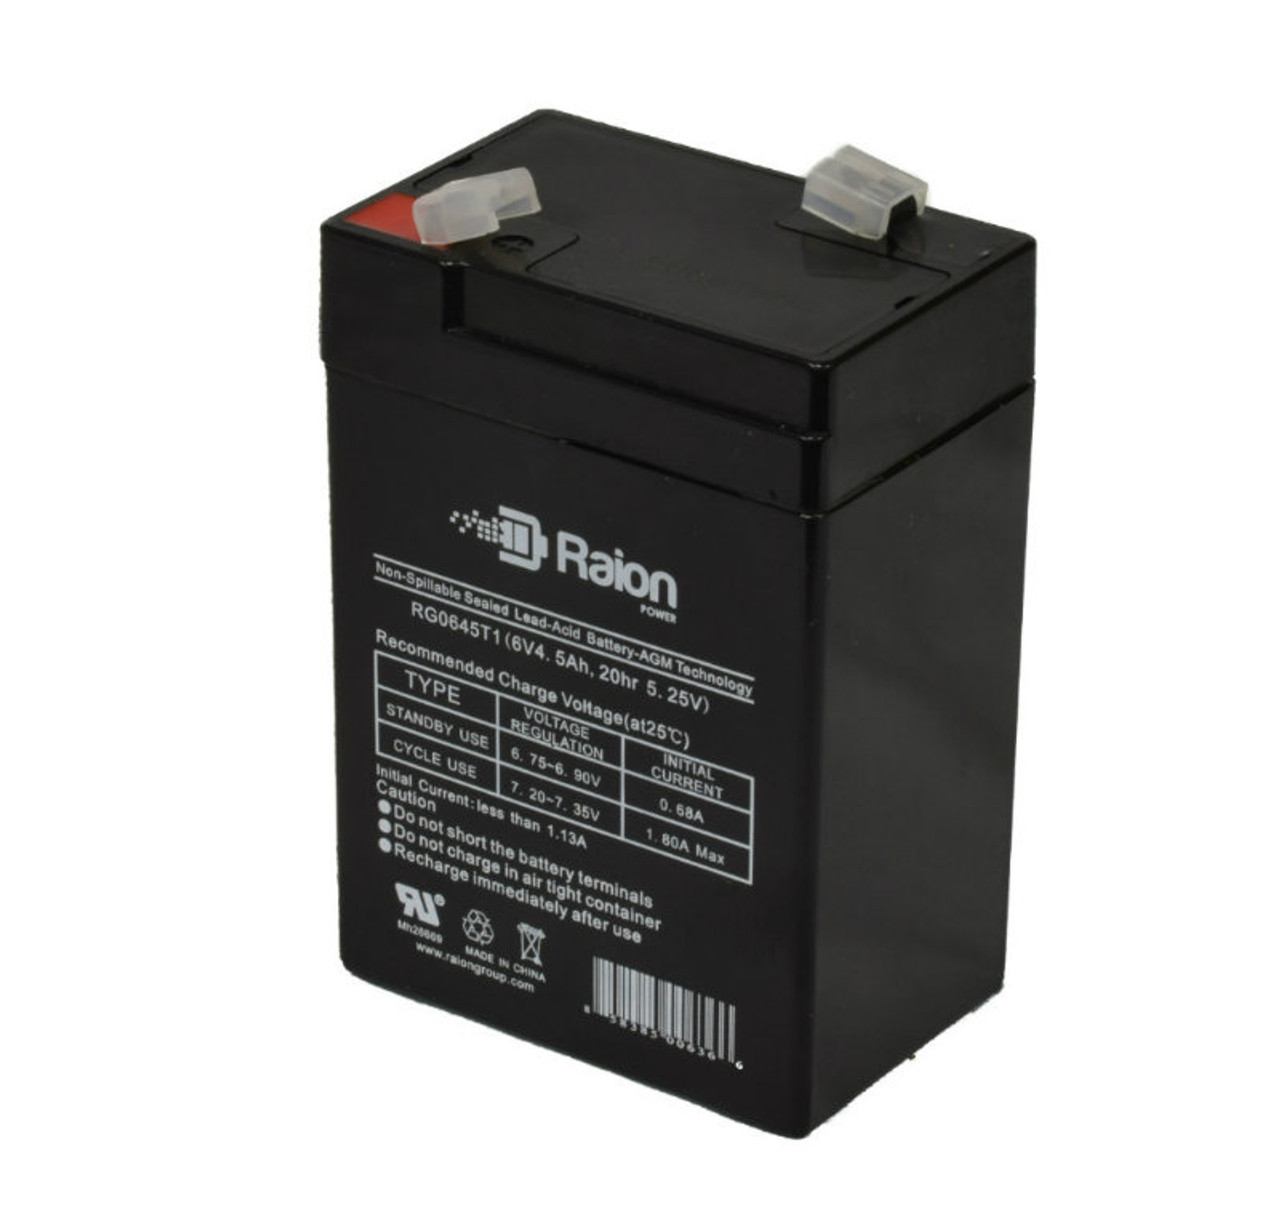 Raion Power RG0645T1 6V 4.5Ah Replacement Battery Cartridge for Elpower EP640